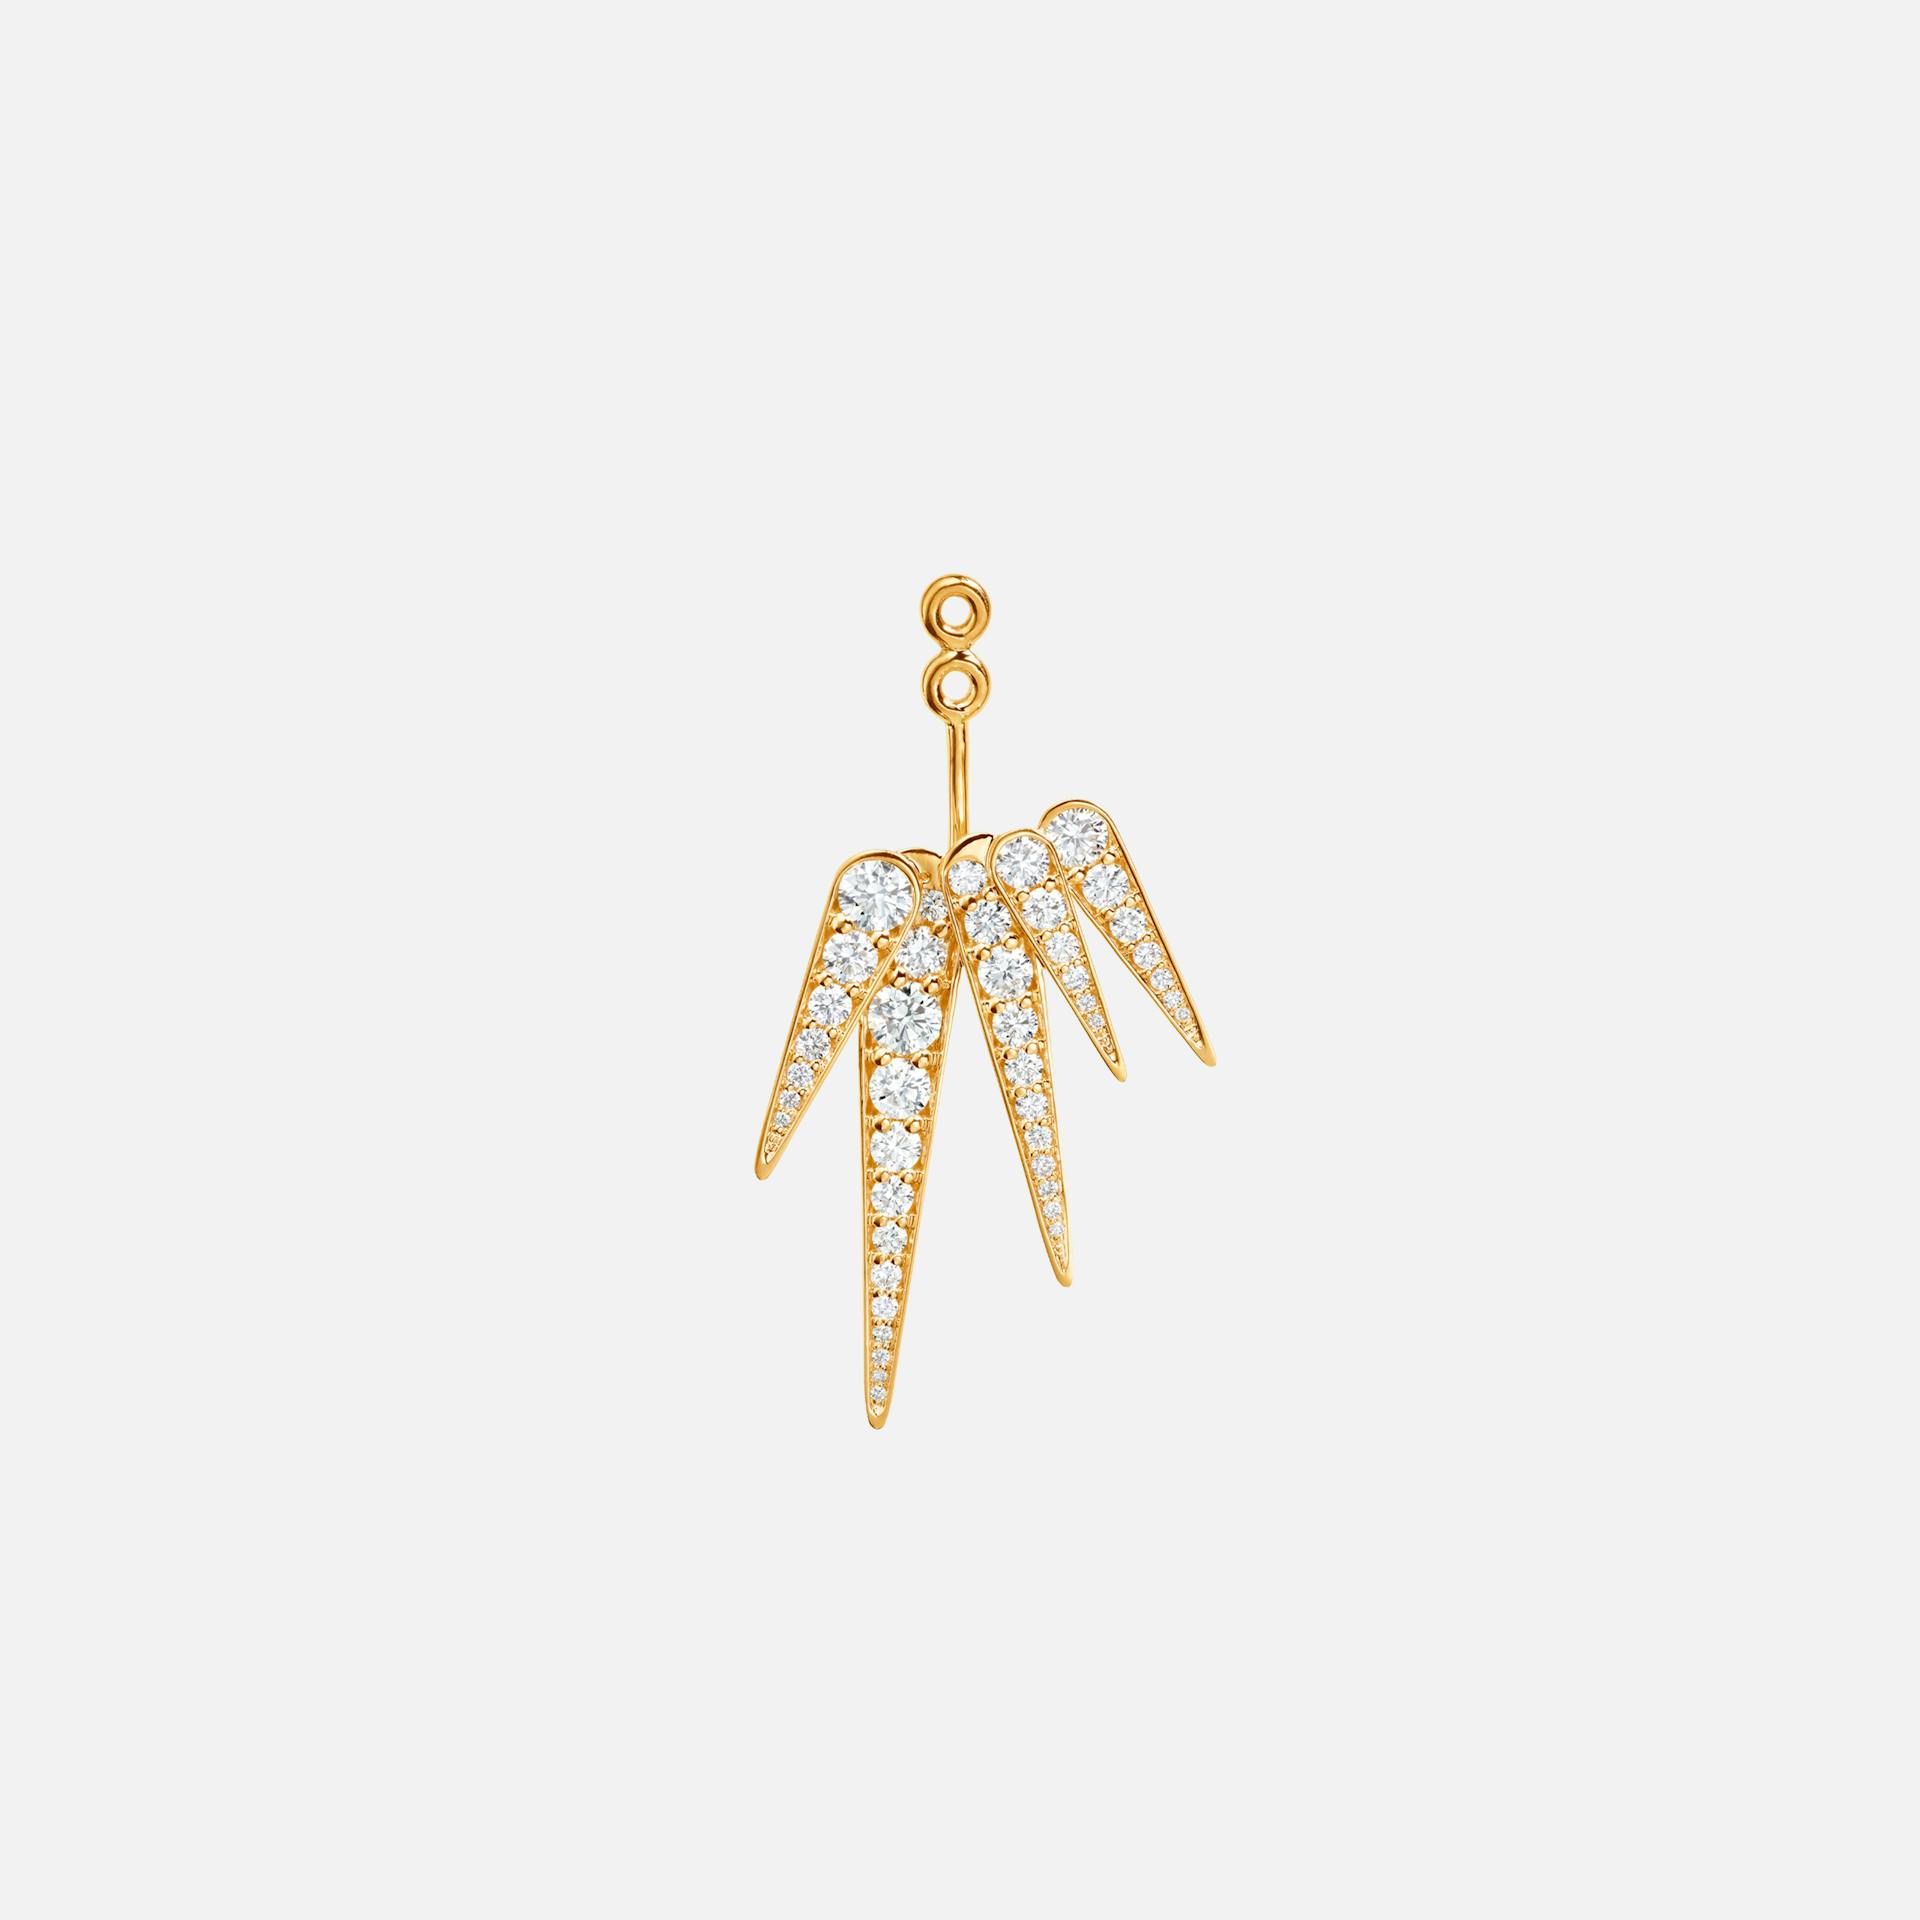 Funky Stars 5-pointed earring pendant